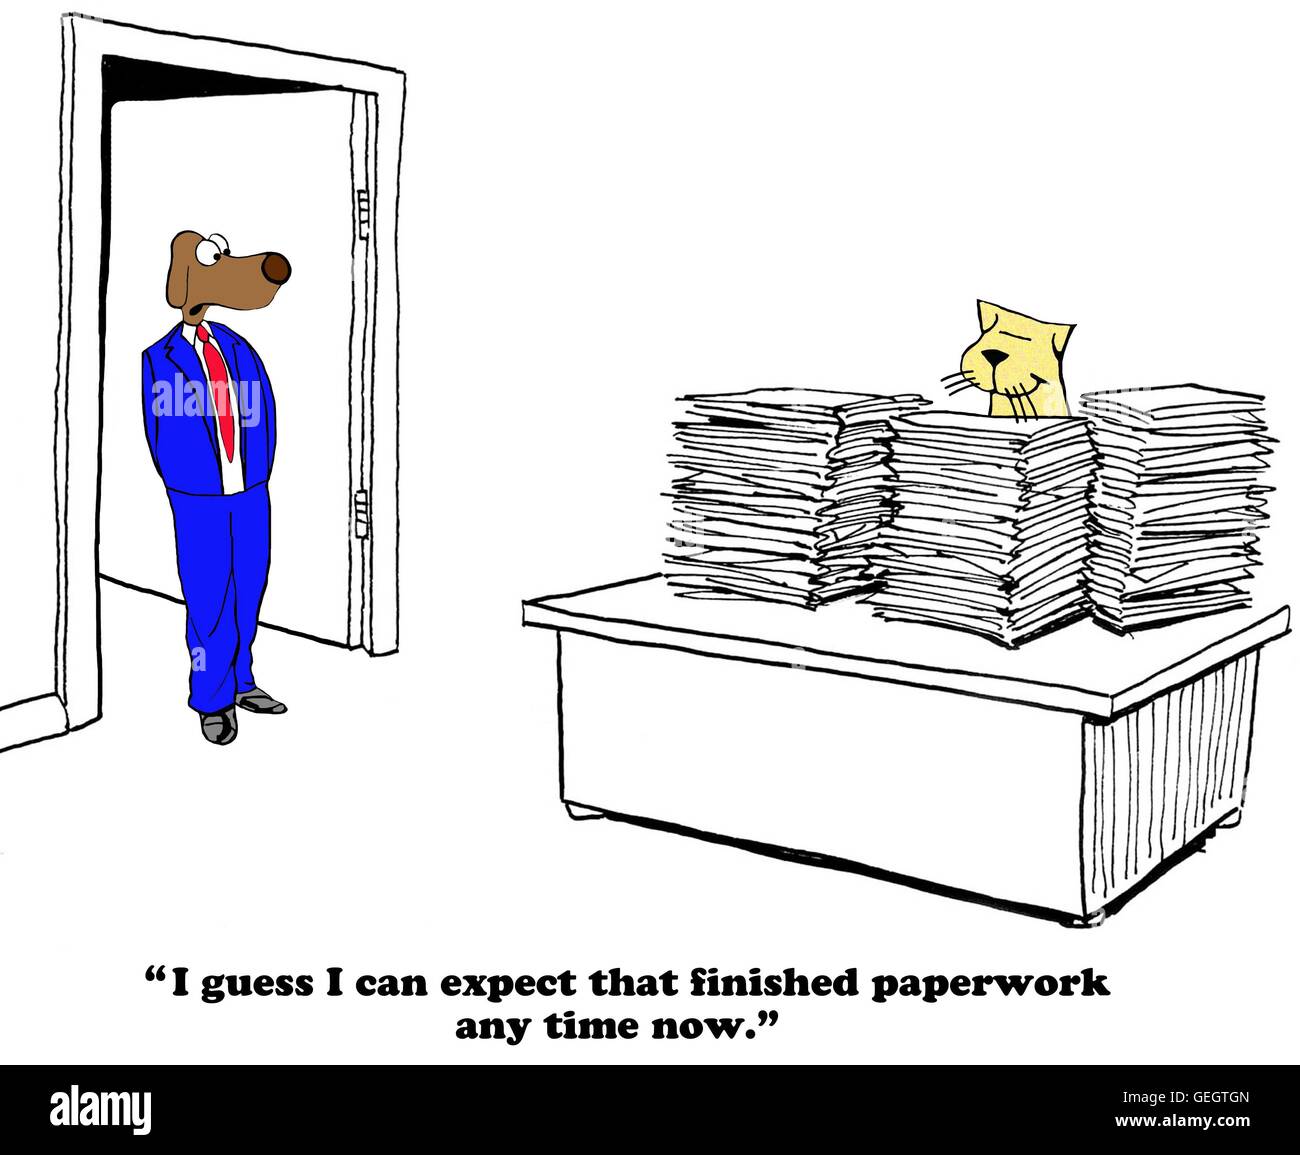 Business cartoon about a boss with unrealistic expectations. Stock Photo